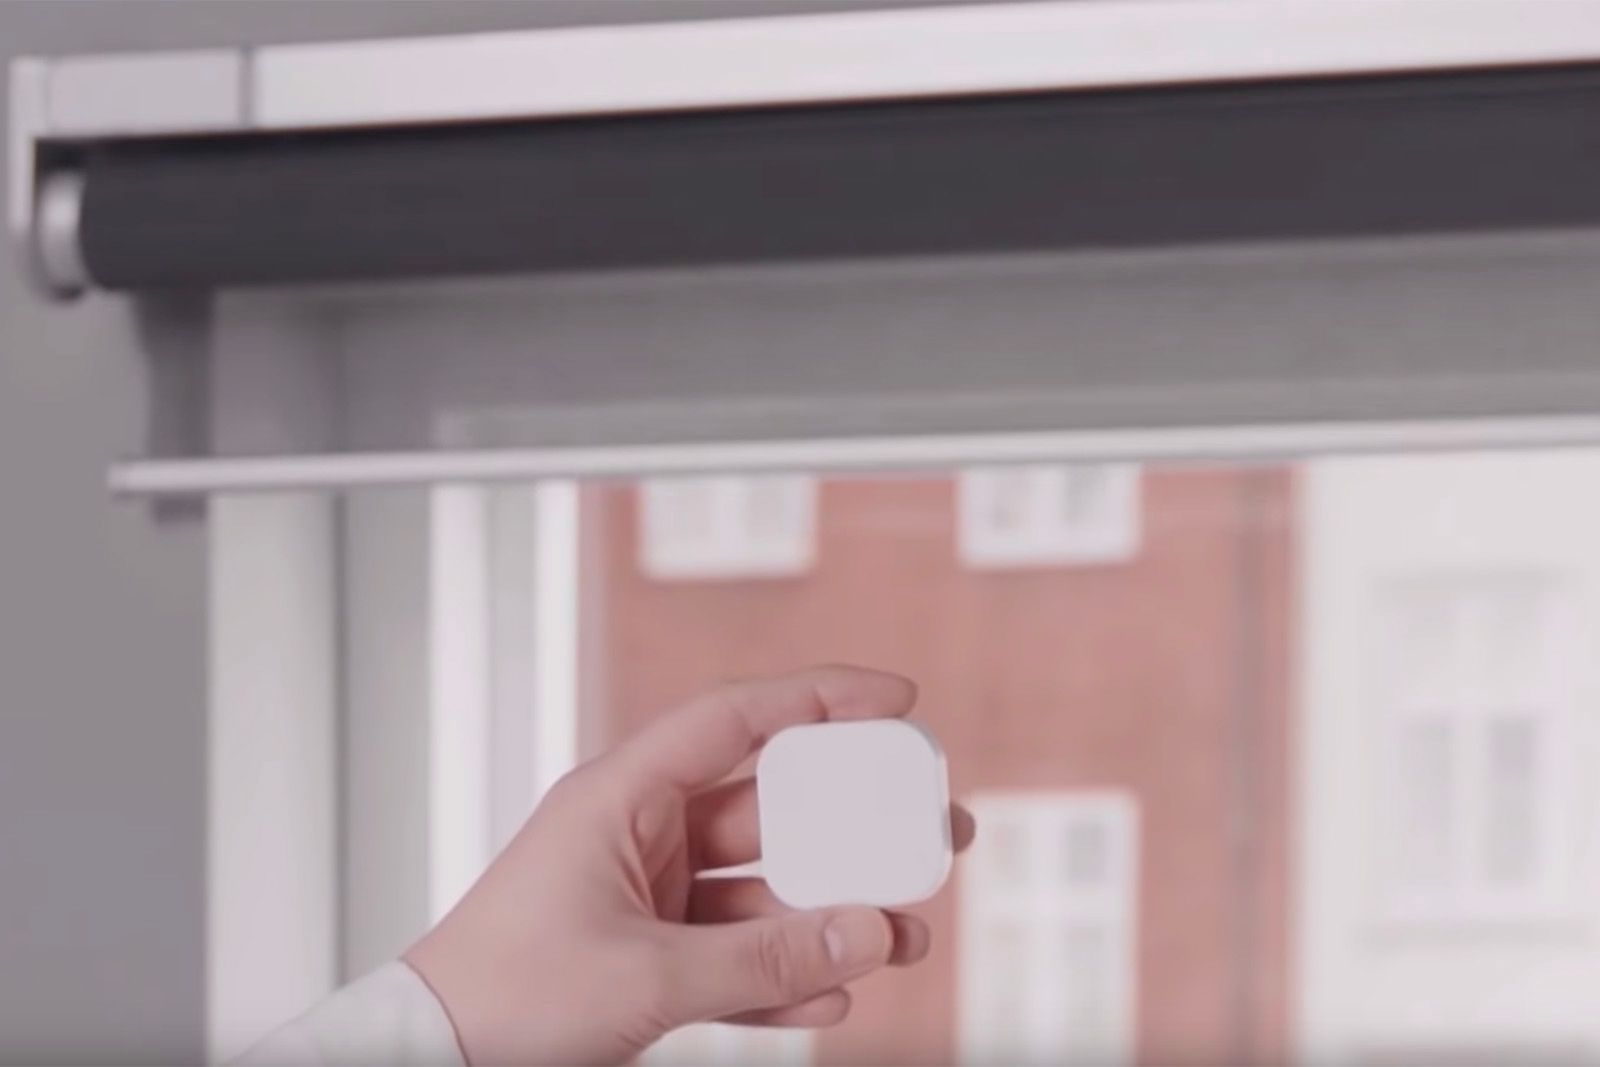 Ikea smart blinds coming with Alexa Google Assistant and Homekit control image 1